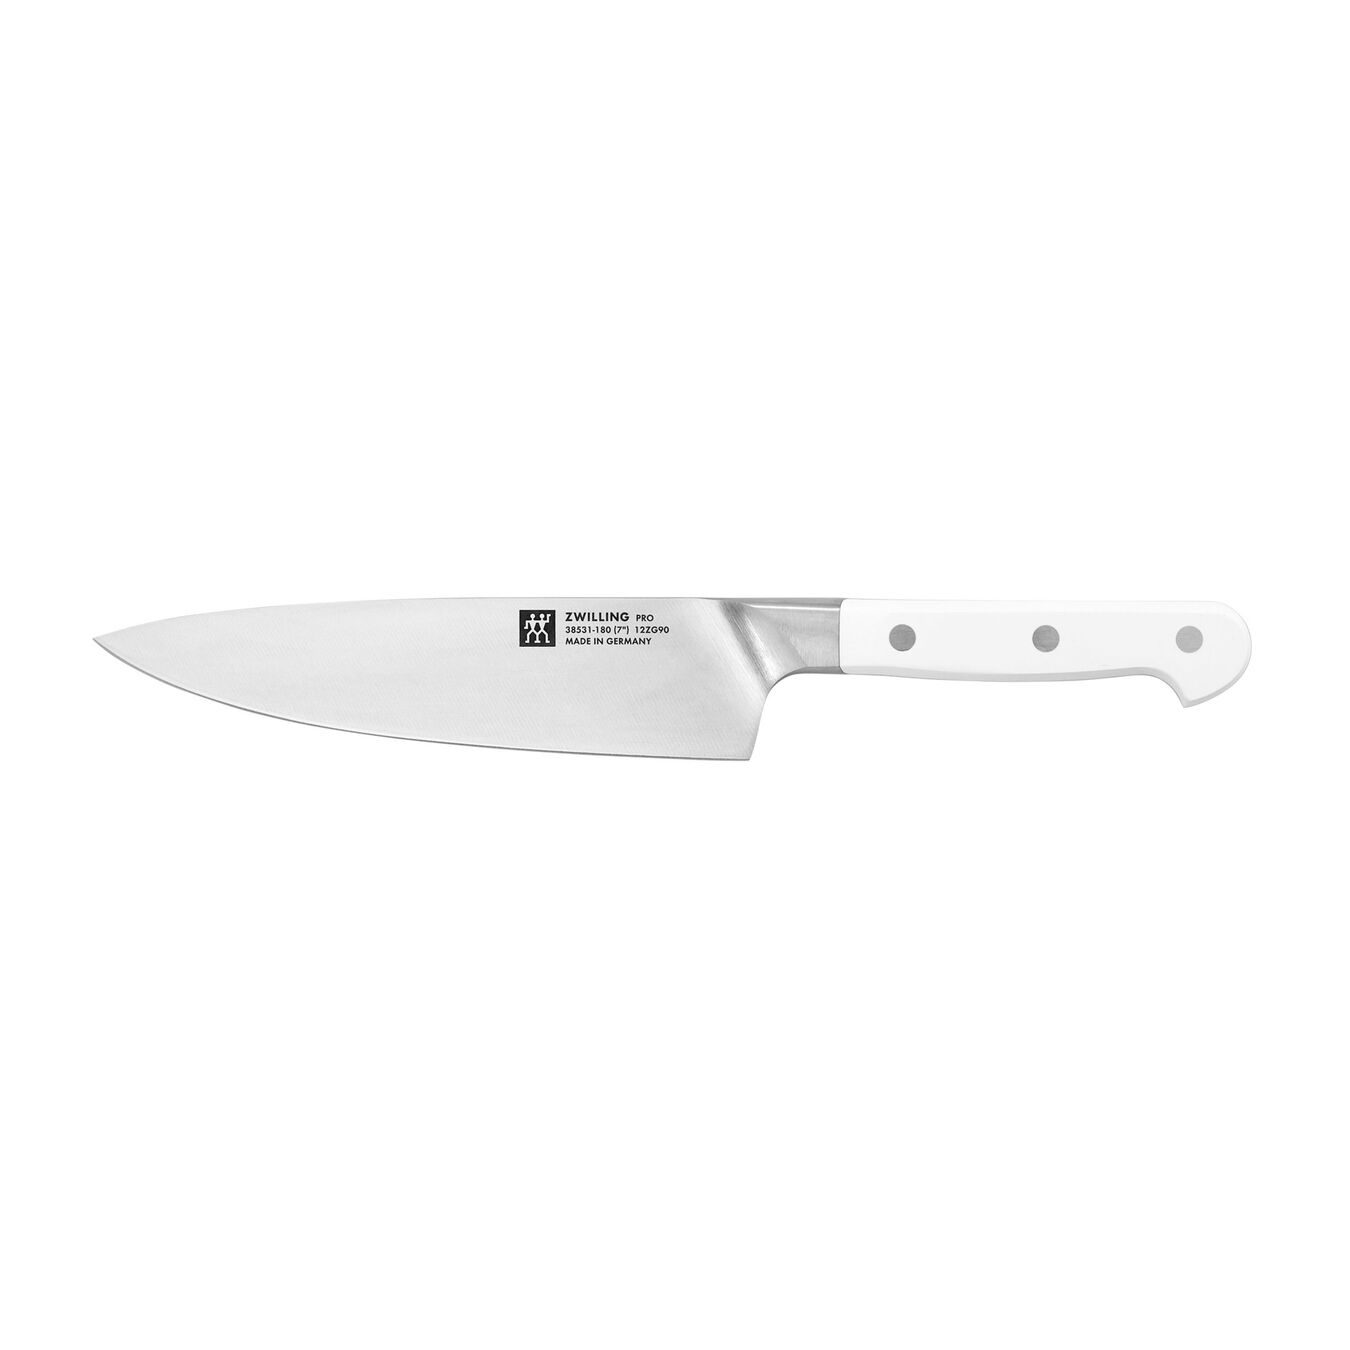 7-inch, Chef's SLIM Knife,,large 1